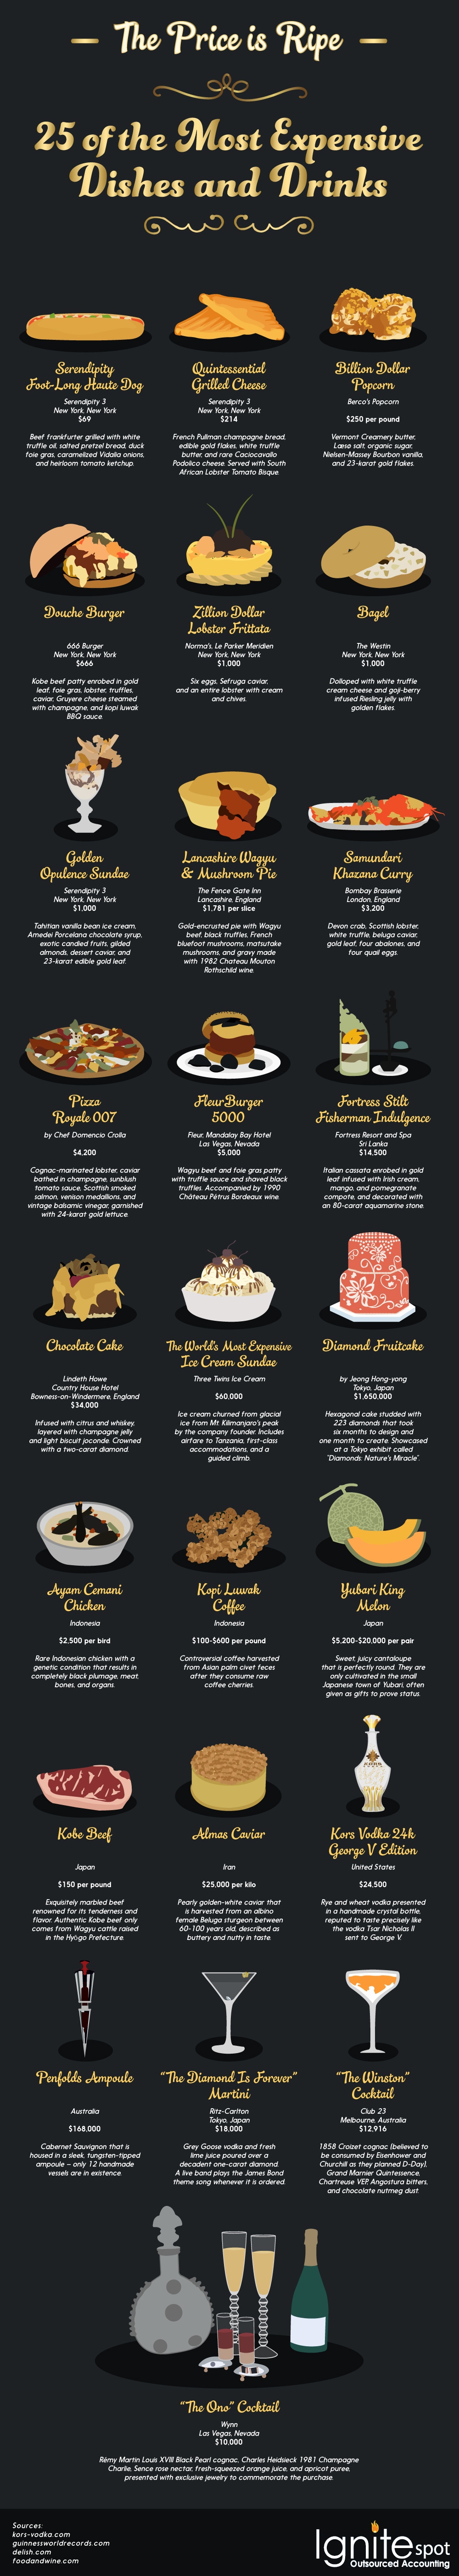 ExpensiveFoods-infographic